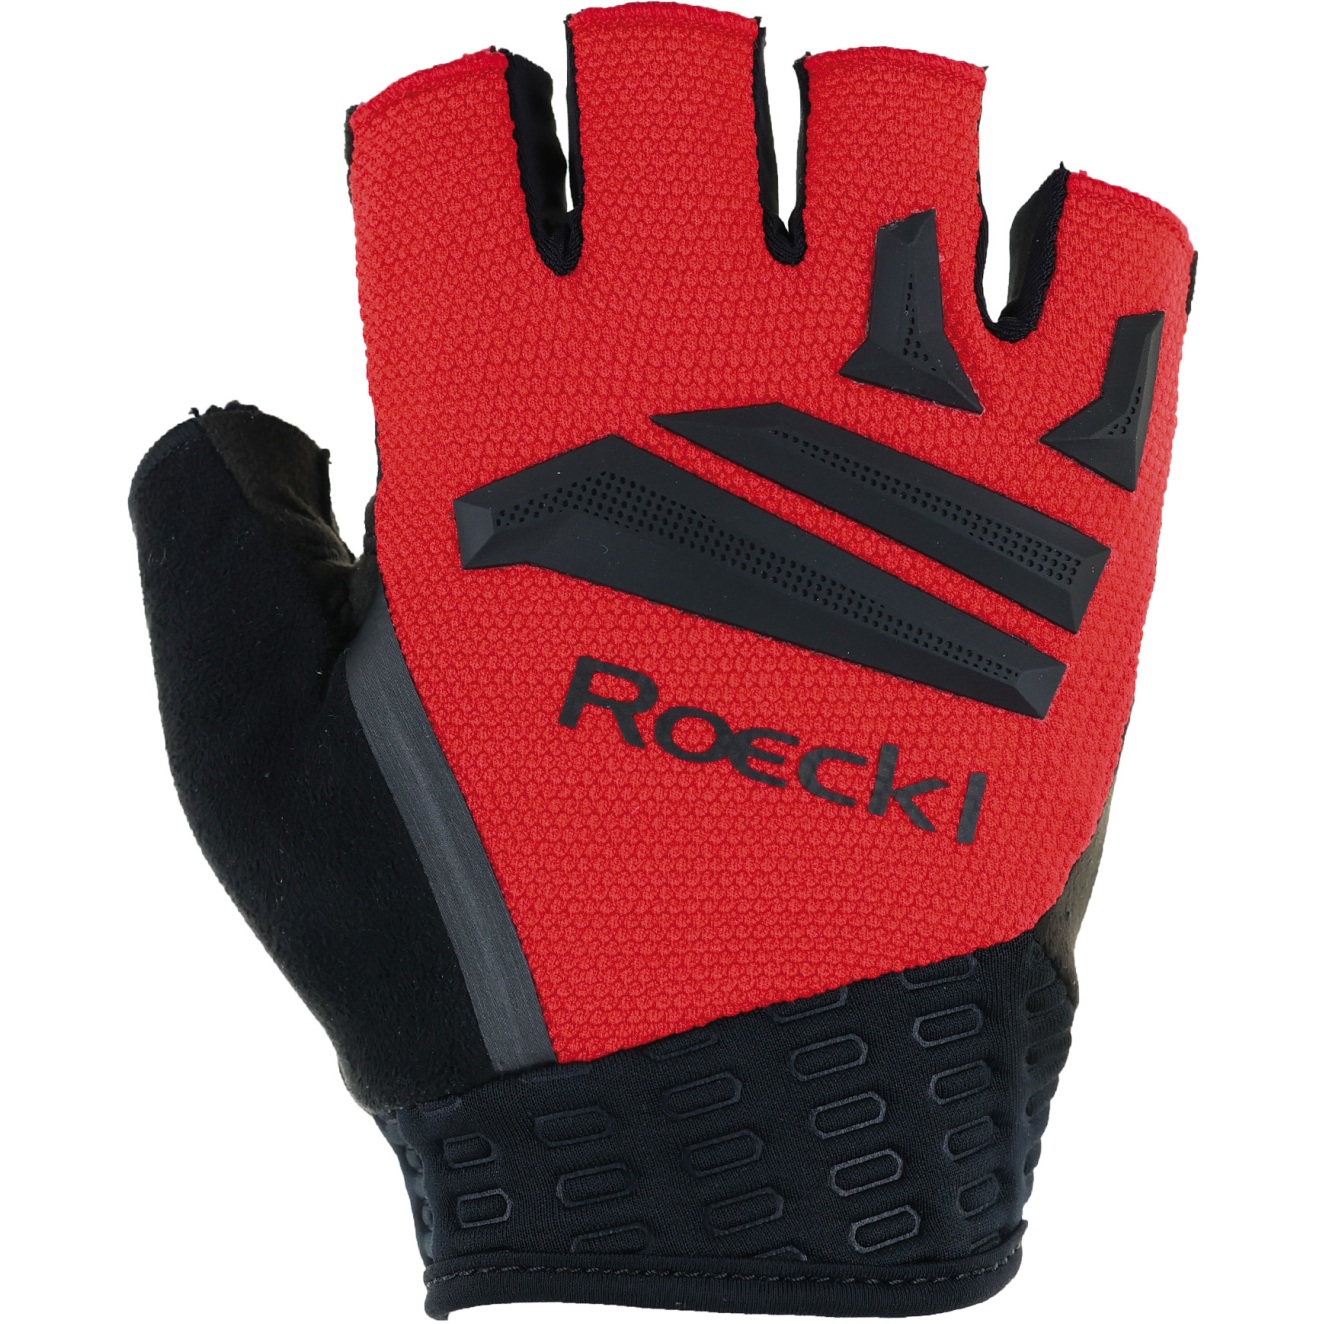 Picture of Roeckl Sports Iseler Cycling Gloves - fiery red 3400